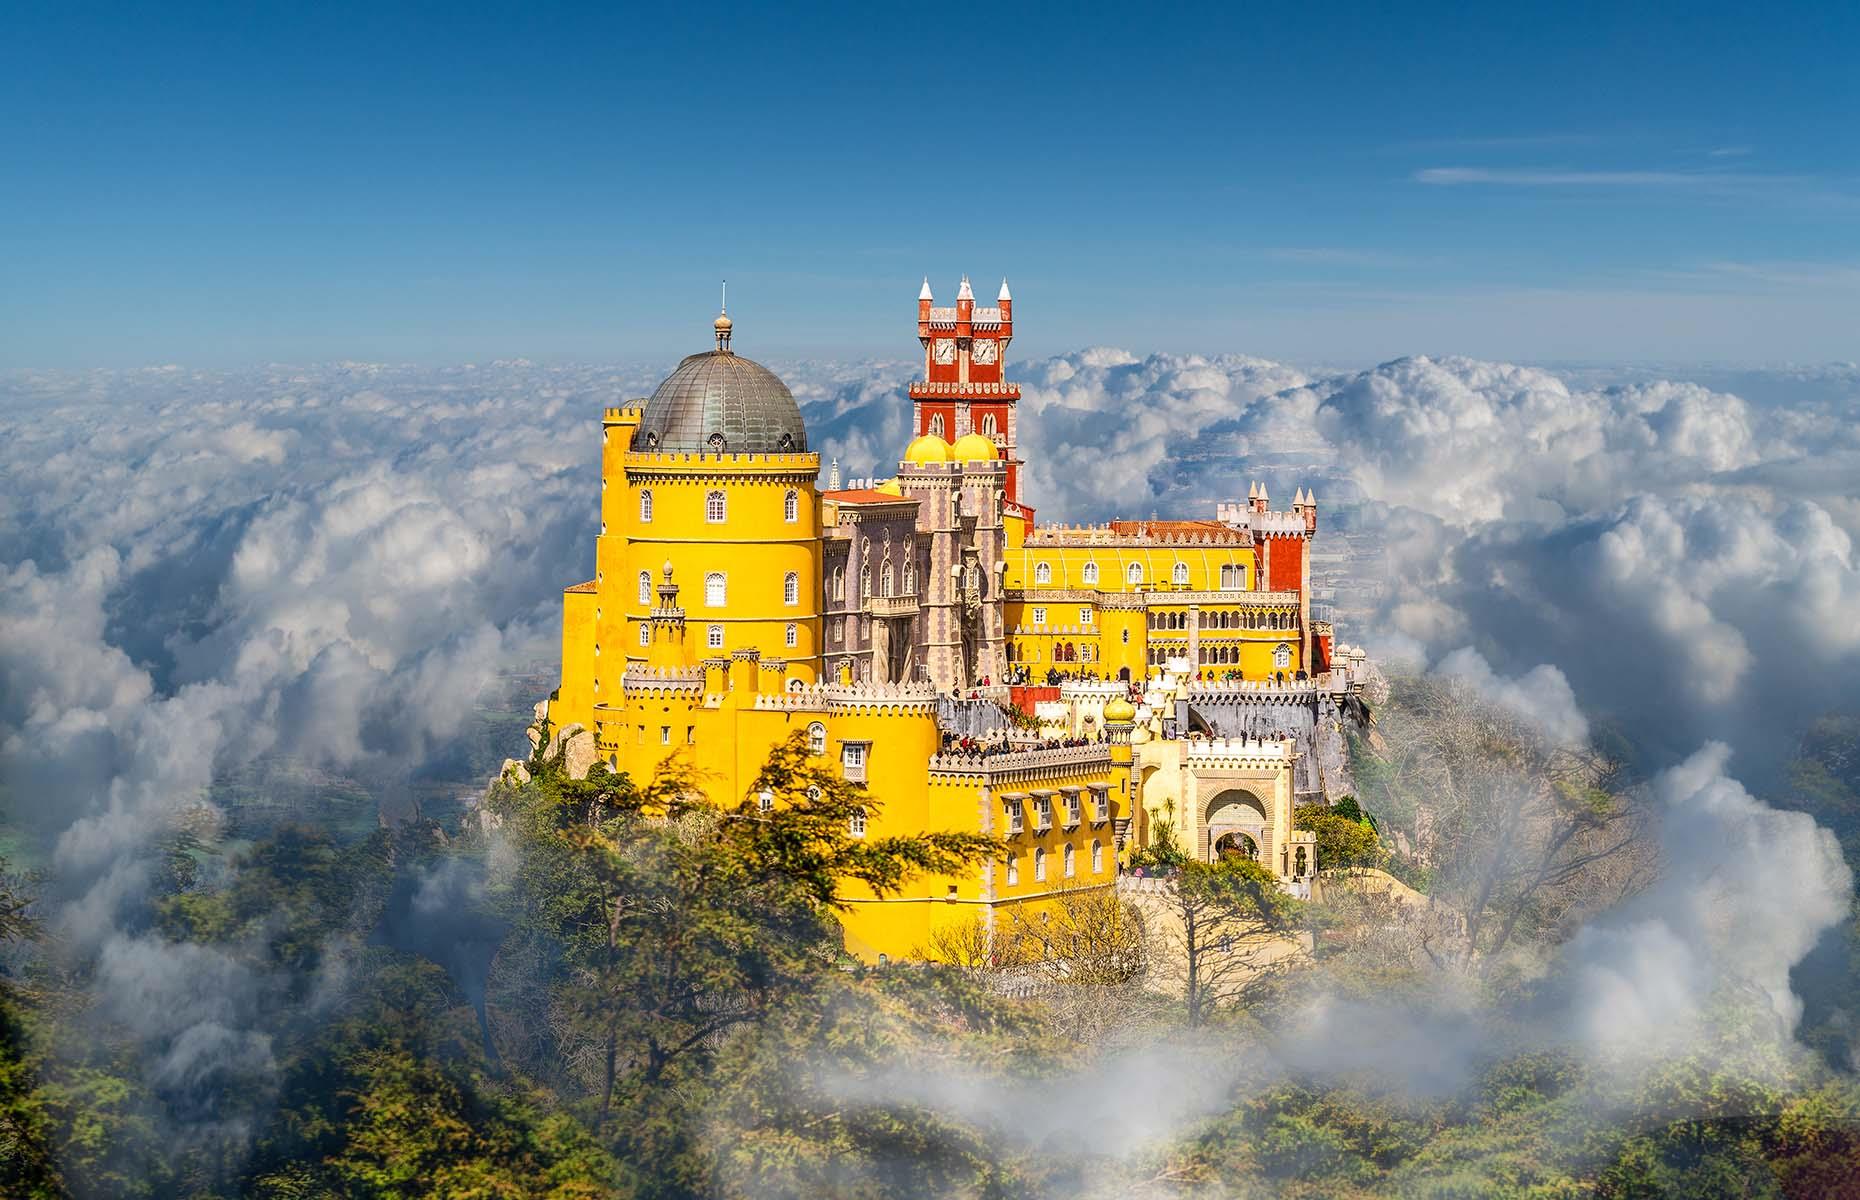 <p>It might be called a palace, but Pena Palace is in fact a castle, and few are so heart-flutteringly pretty. Its butter-yellow turrets and brick-red towers rise above the treetops in hilly Sintra, just outside Lisbon. The multicoloured beauty, an example of 19th-century Romantic architecture, was commissioned by King Ferdinand II and completed in 1854, and has been home to Portuguese royals through the years.</p>  <p><a href="https://www.loveexploring.com/gallerylist/67038/europes-most-beautiful-castles"><strong>These are Europe's most beautiful castles</strong></a></p>